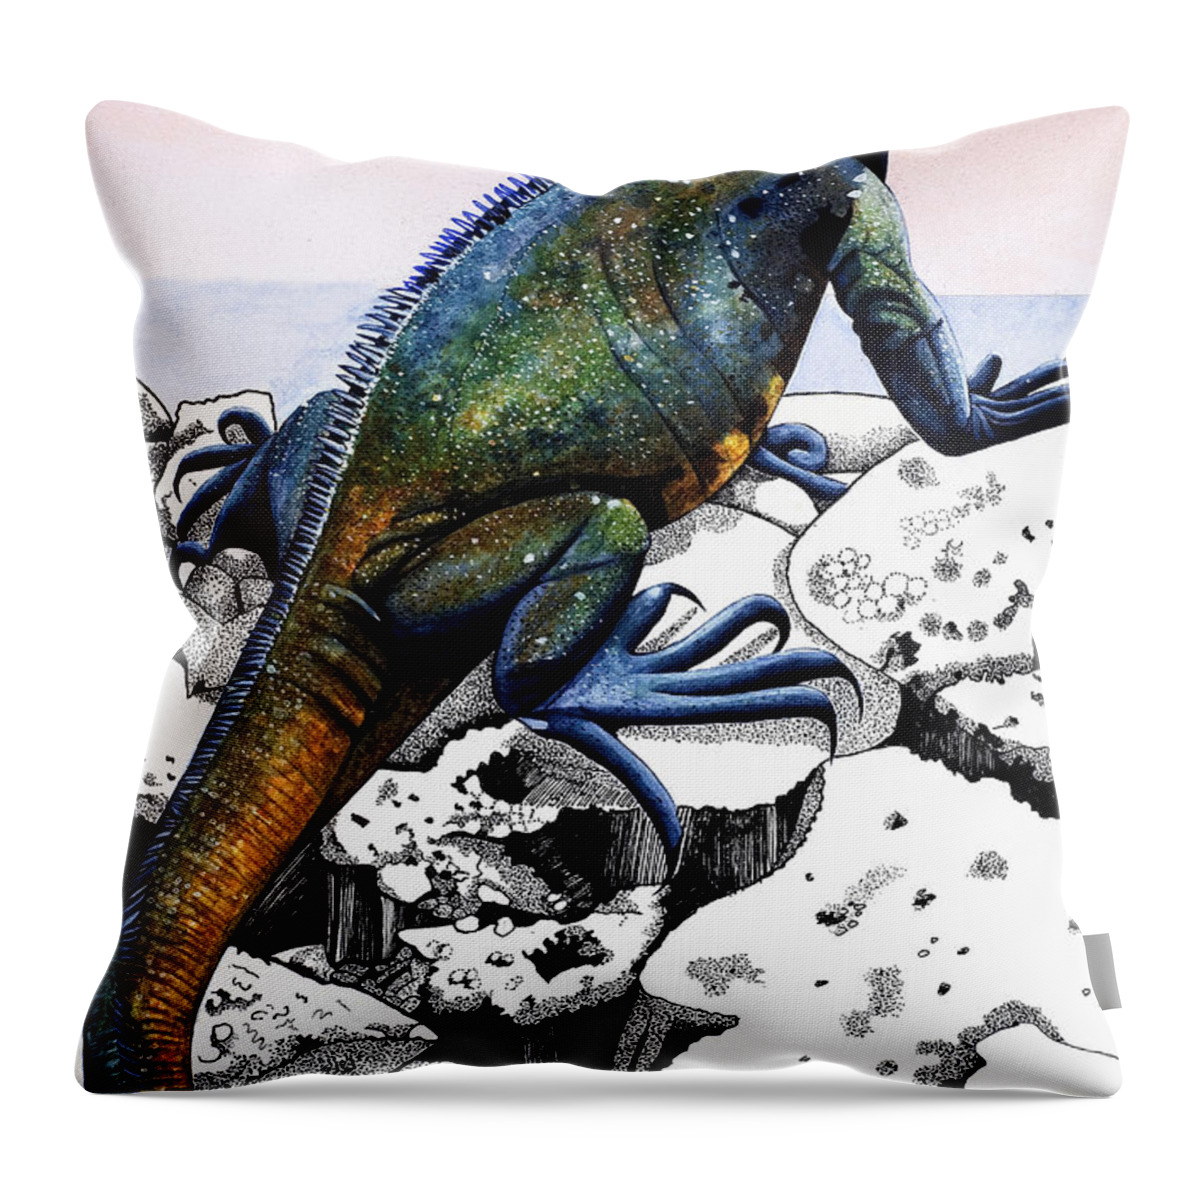 Marine Iguana Throw Pillow featuring the painting Dragons Of The Enchanted Isles by Susan Cartwright